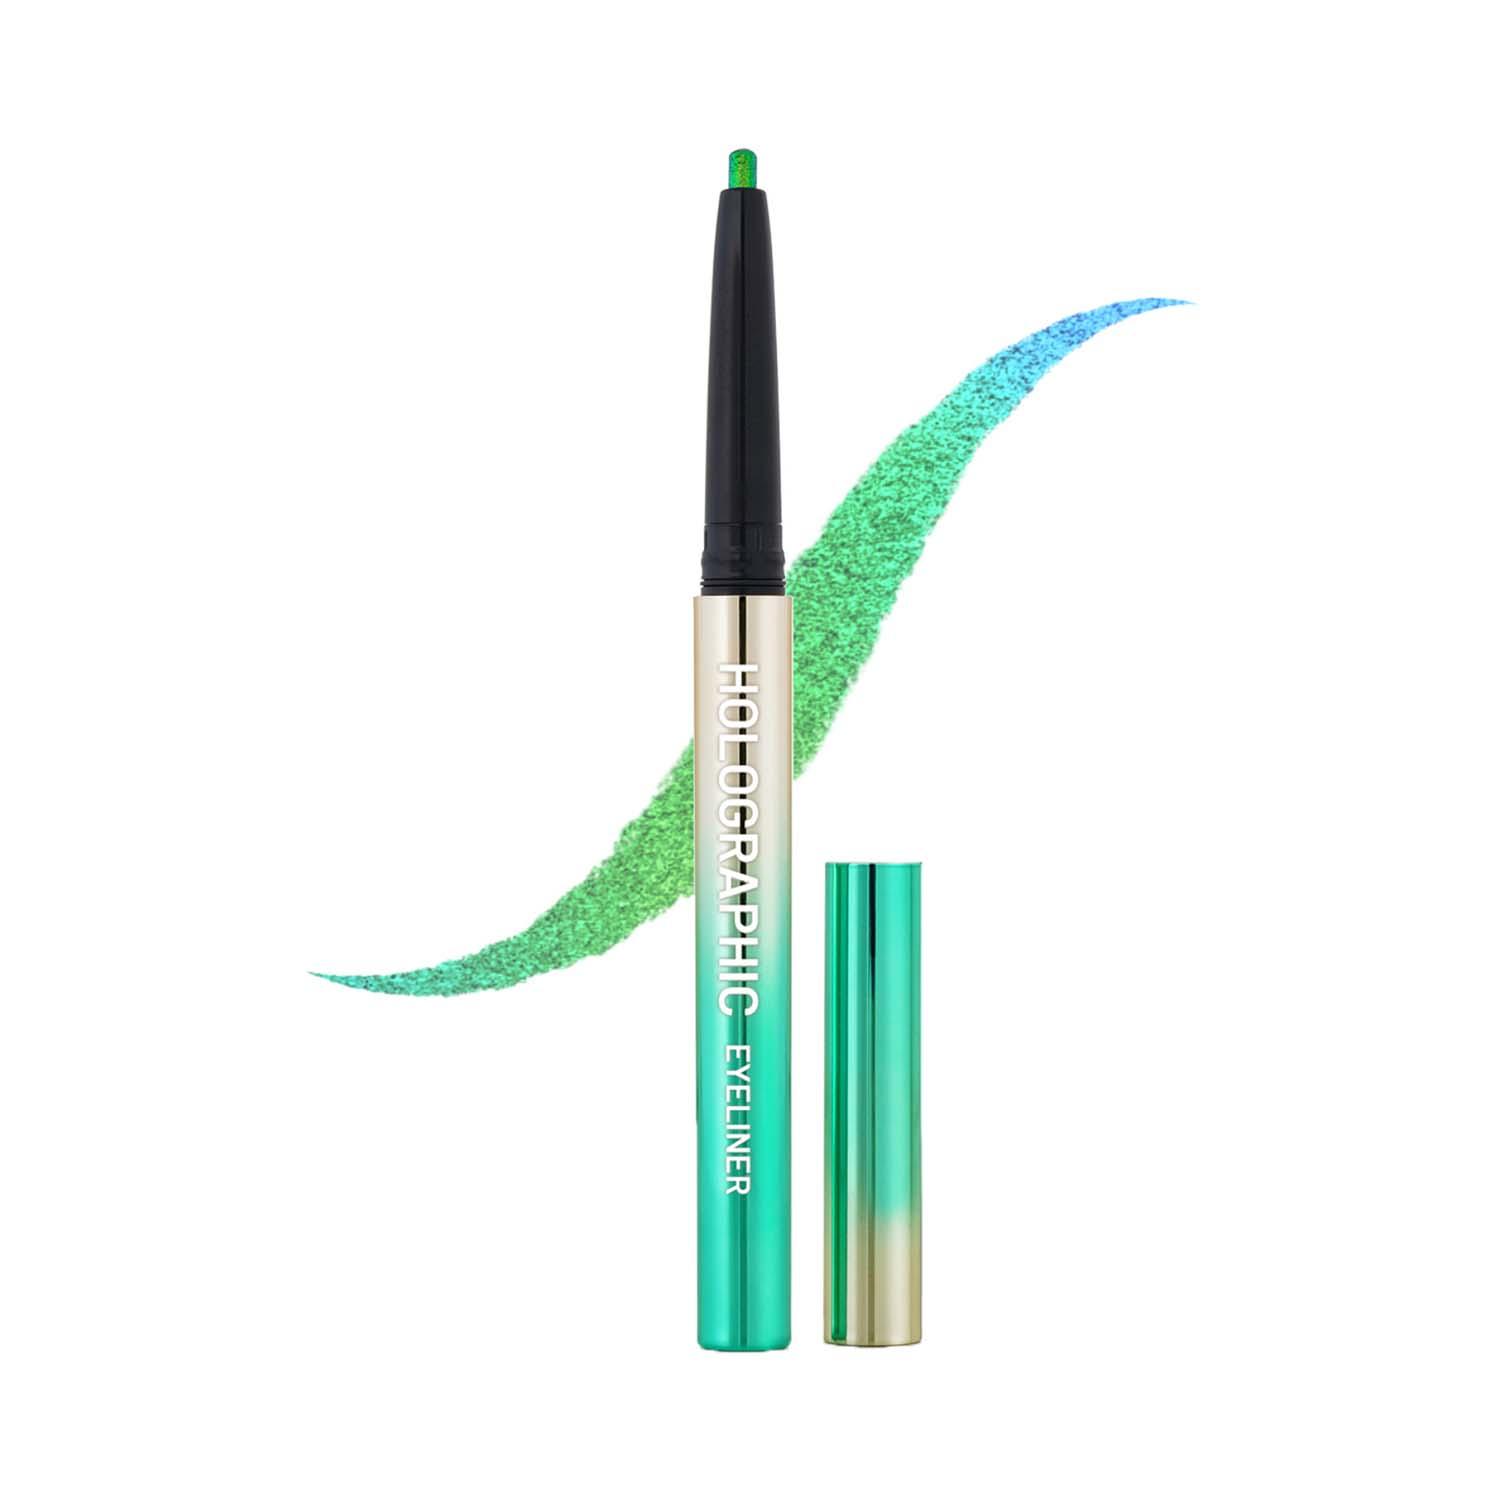 Swiss Beauty Holographic Eyeliner - 06 Colored Earth (0.2 g)